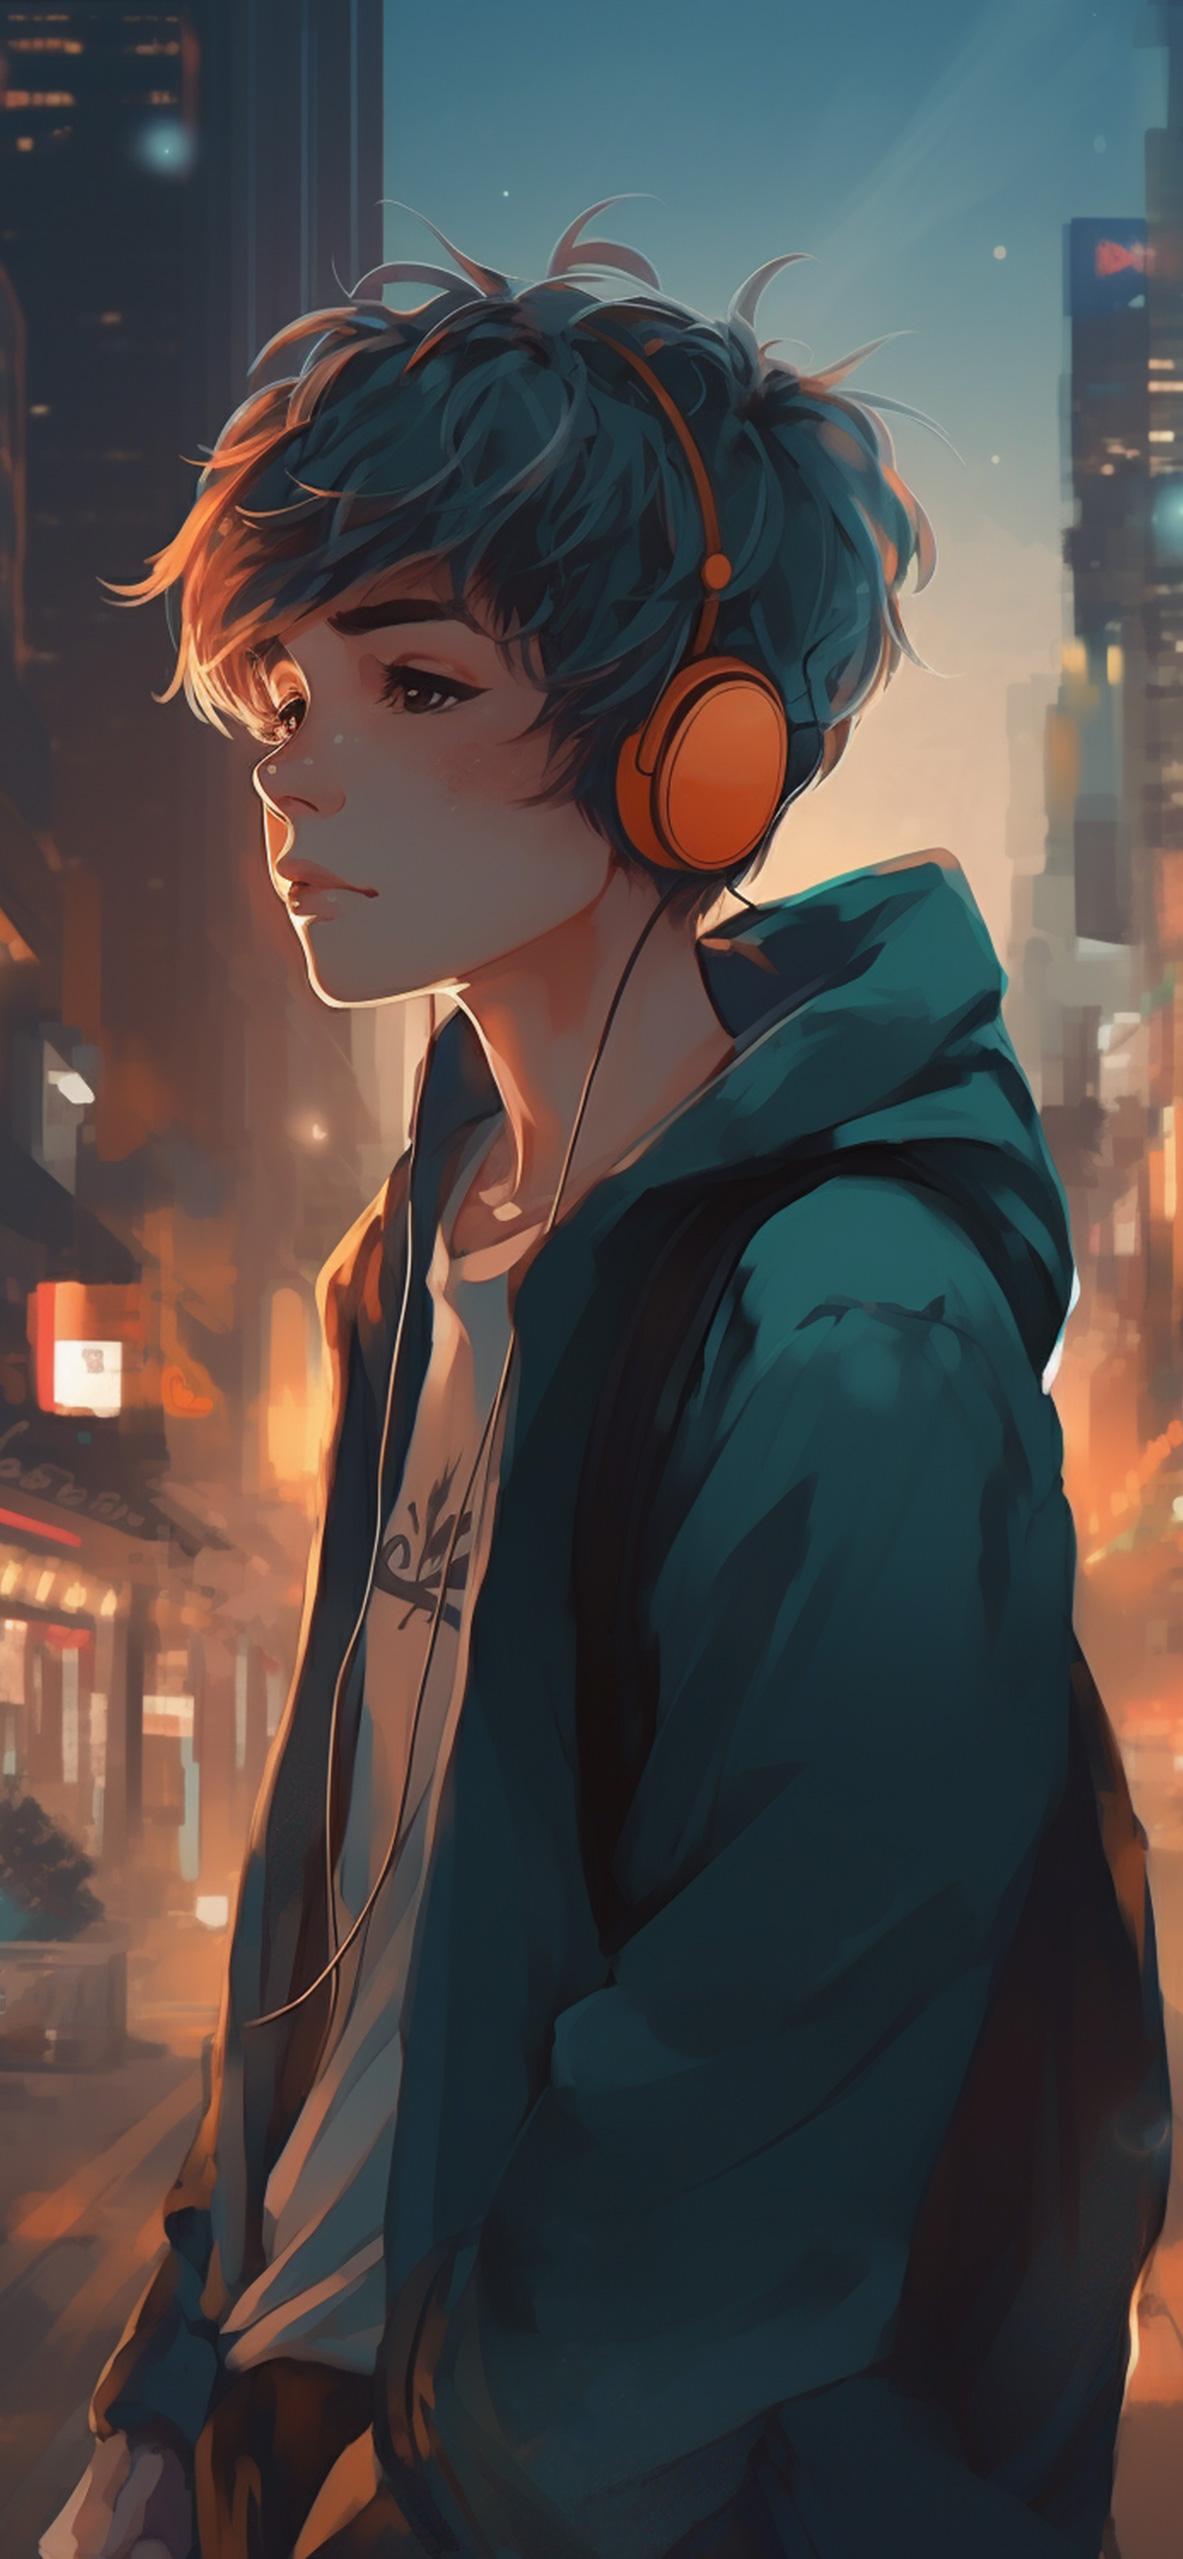 Cute Anime Boy Art Wallpapers Anime Boy Wallpaper for iPhone